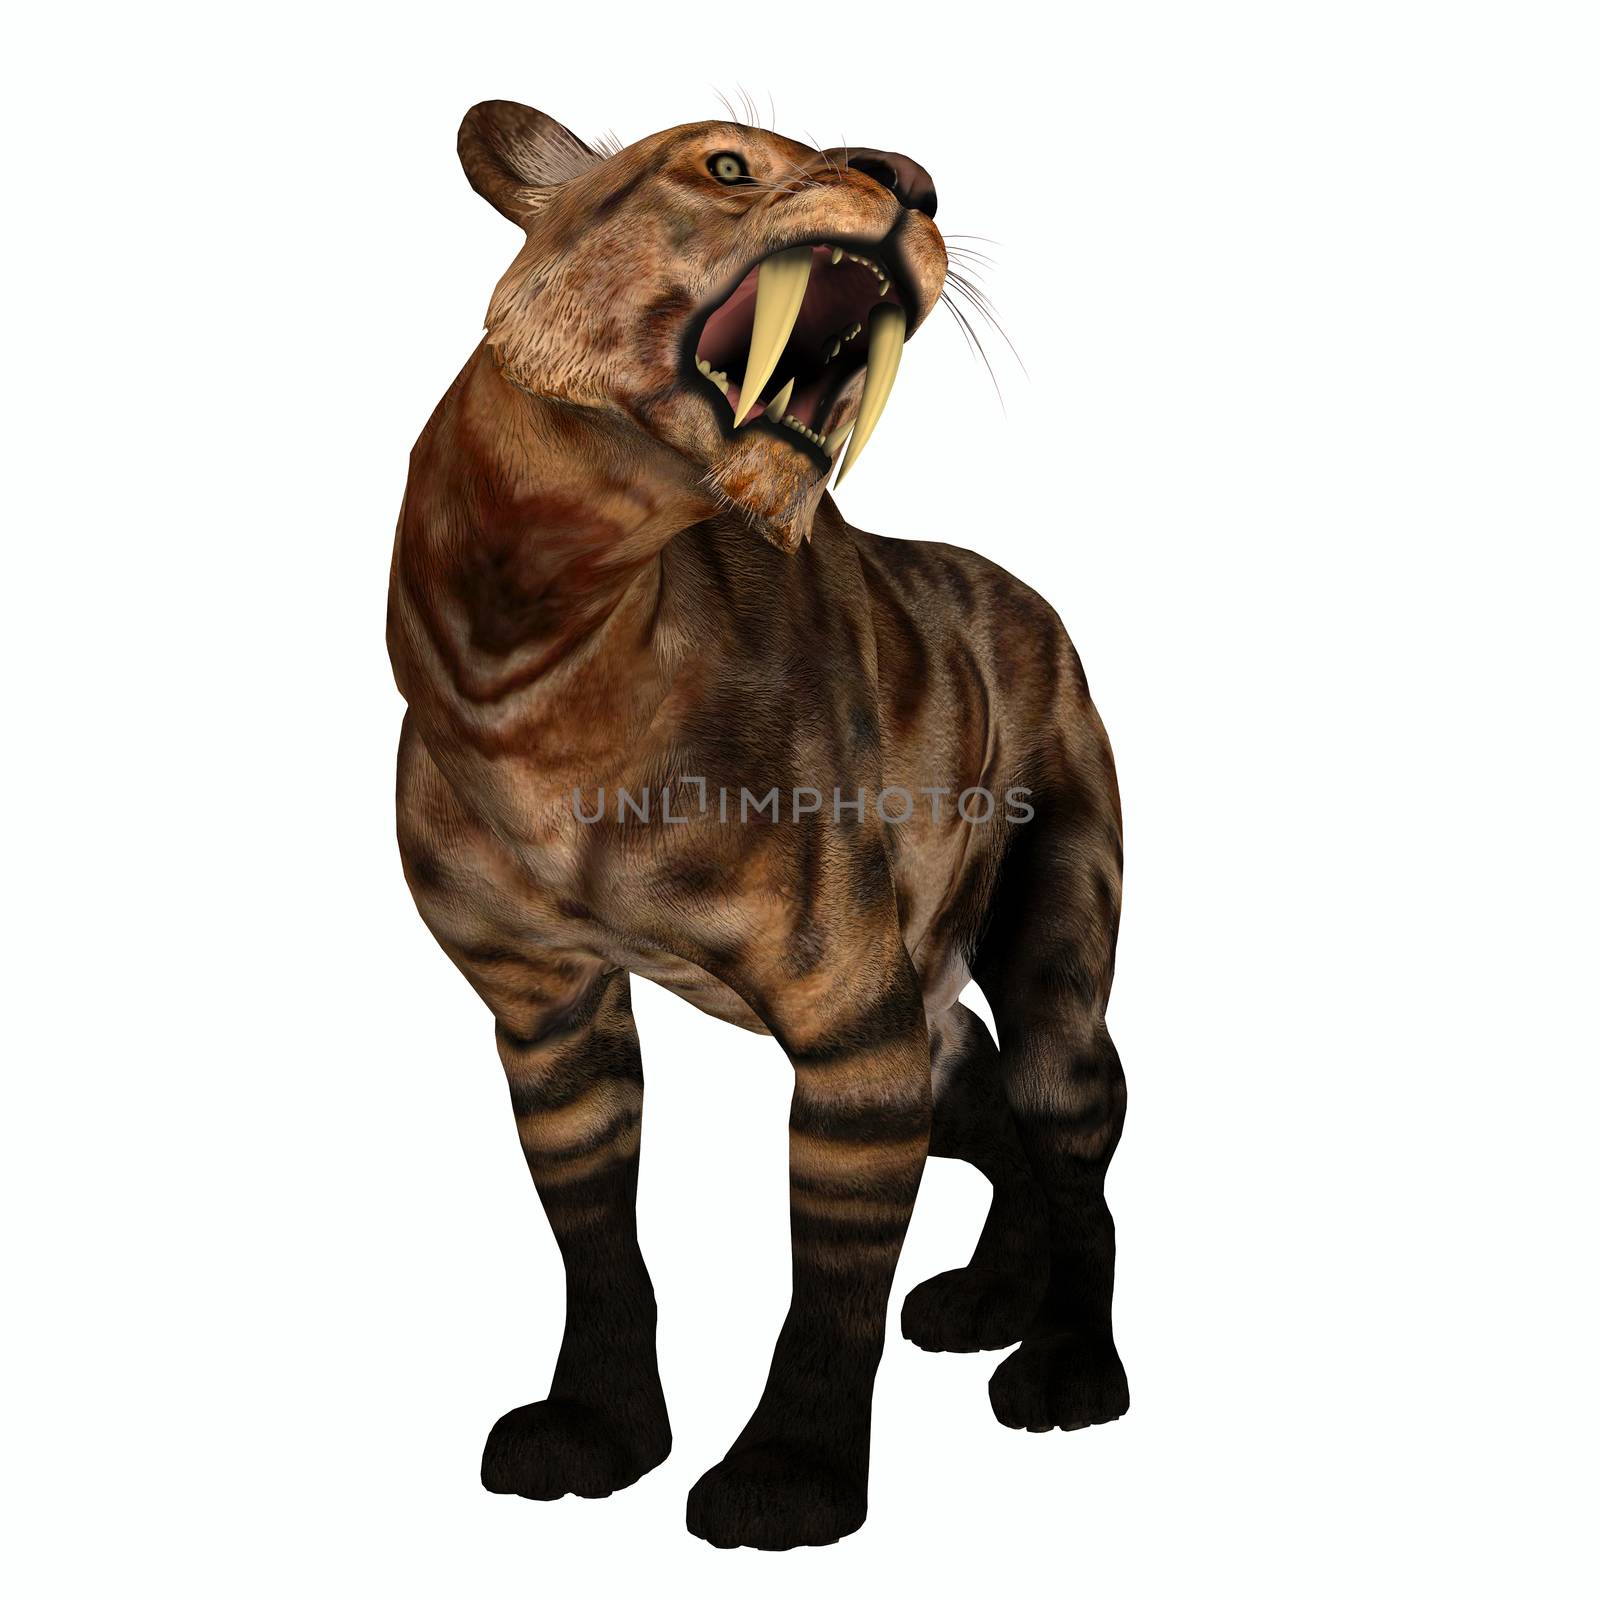 The Saber-tooth Cat also called Smilodon was a large predator that lived in the Eocene to Pleistocene Eras in North and South America.